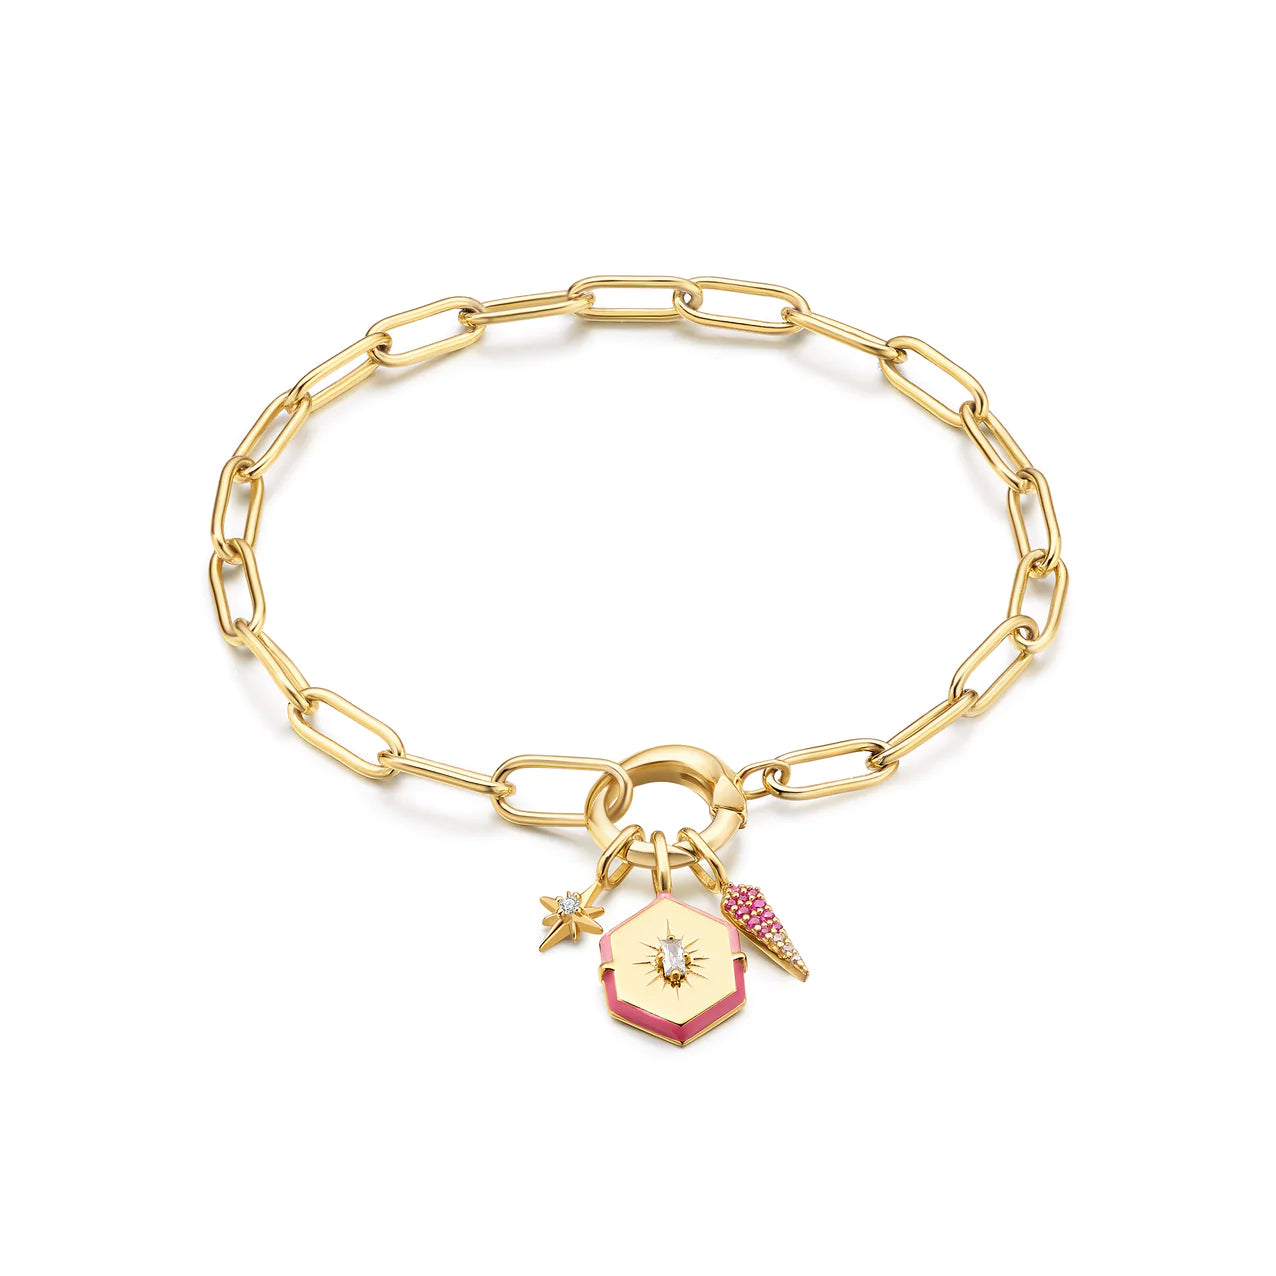 Ania Haie - POP CHARMS Bedel voor Armband of ketting - Pink Ombré